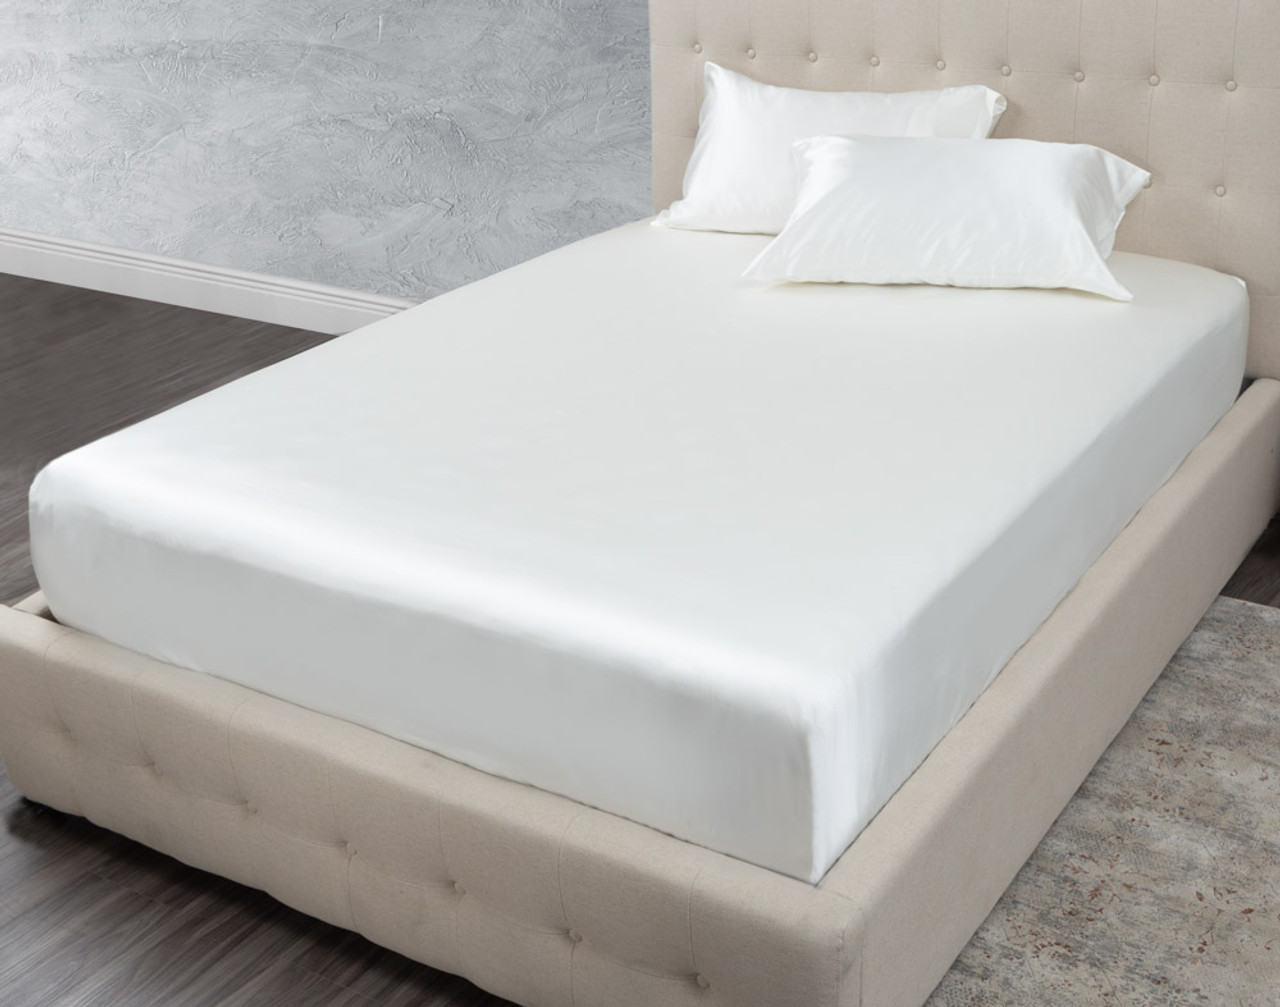 Verve Fitted Sheet shown with matching pillowcases (sold separately)